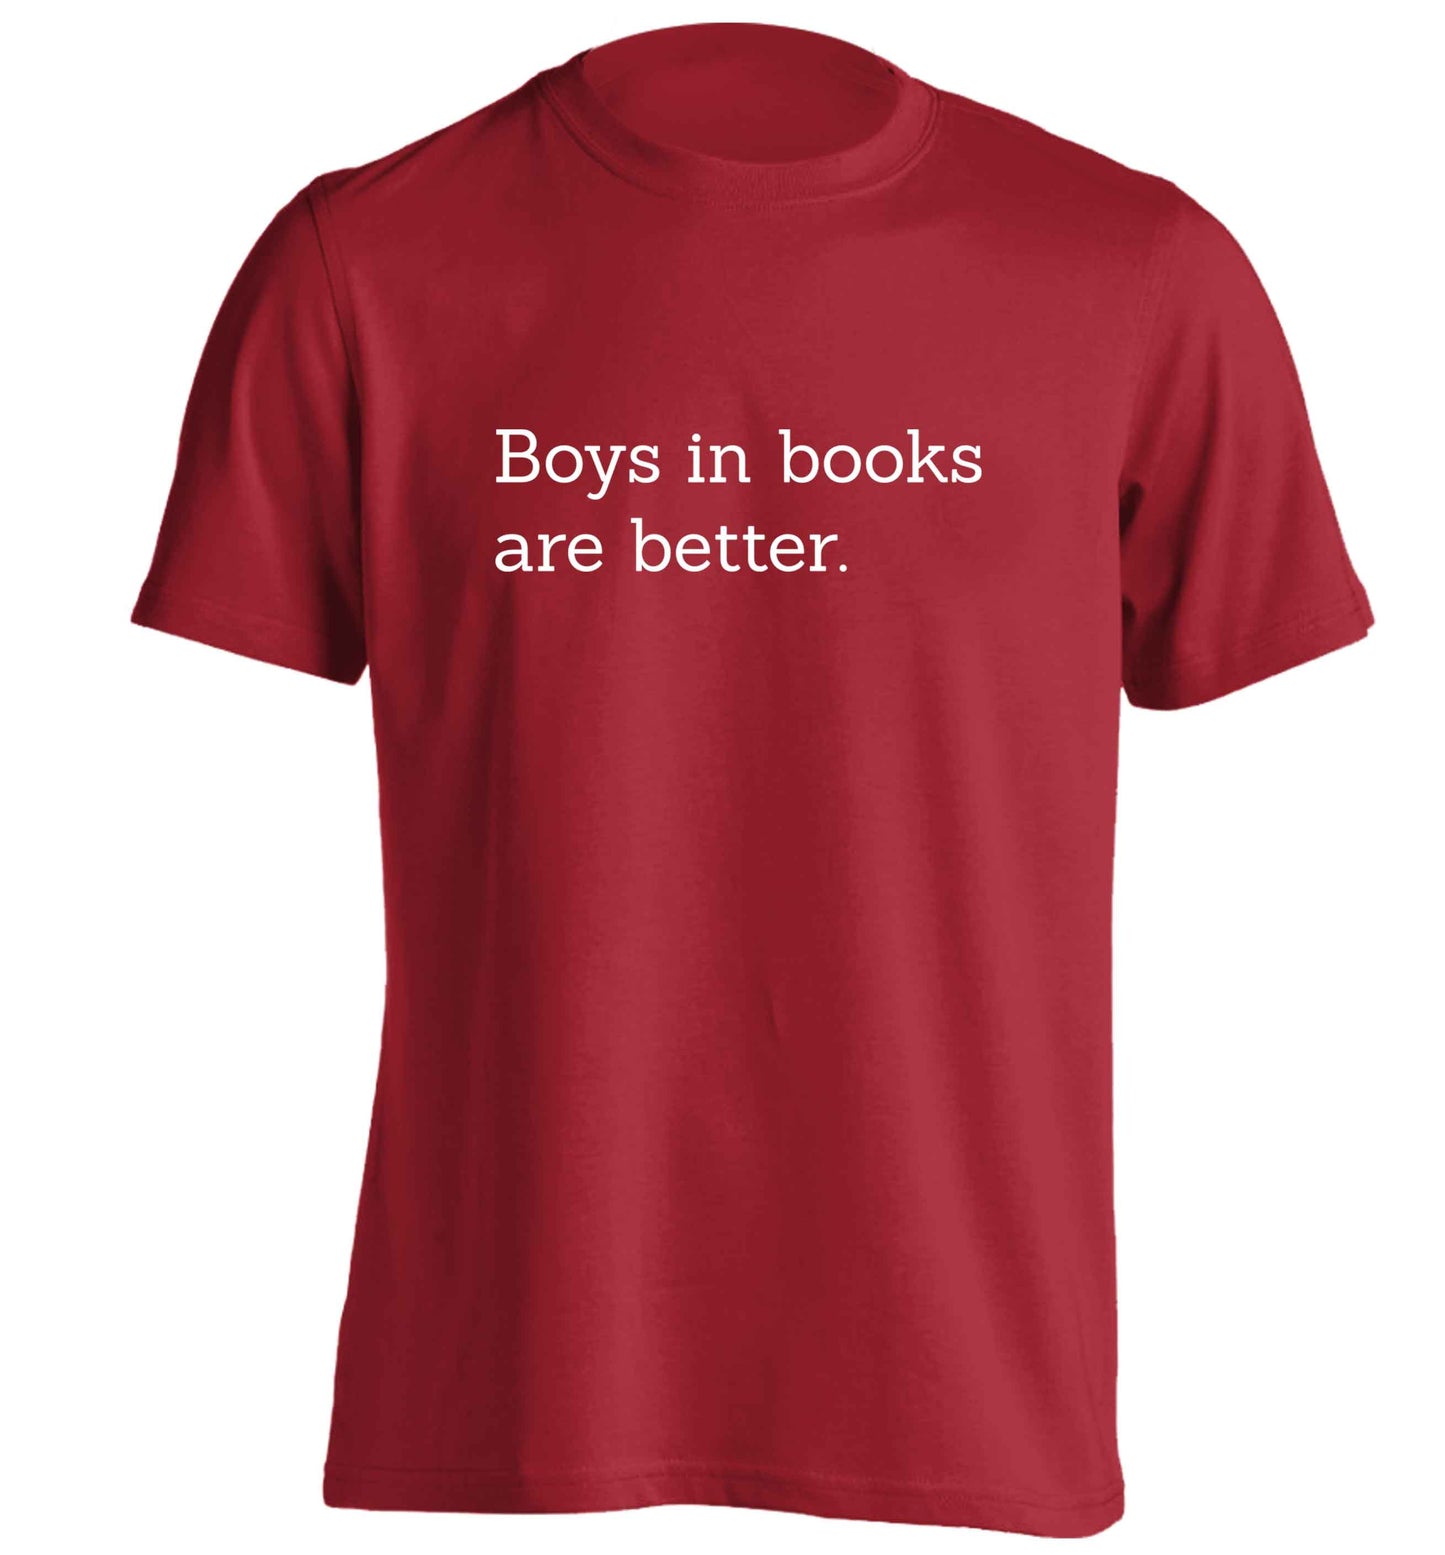 Boys in books are better adults unisex red Tshirt 2XL